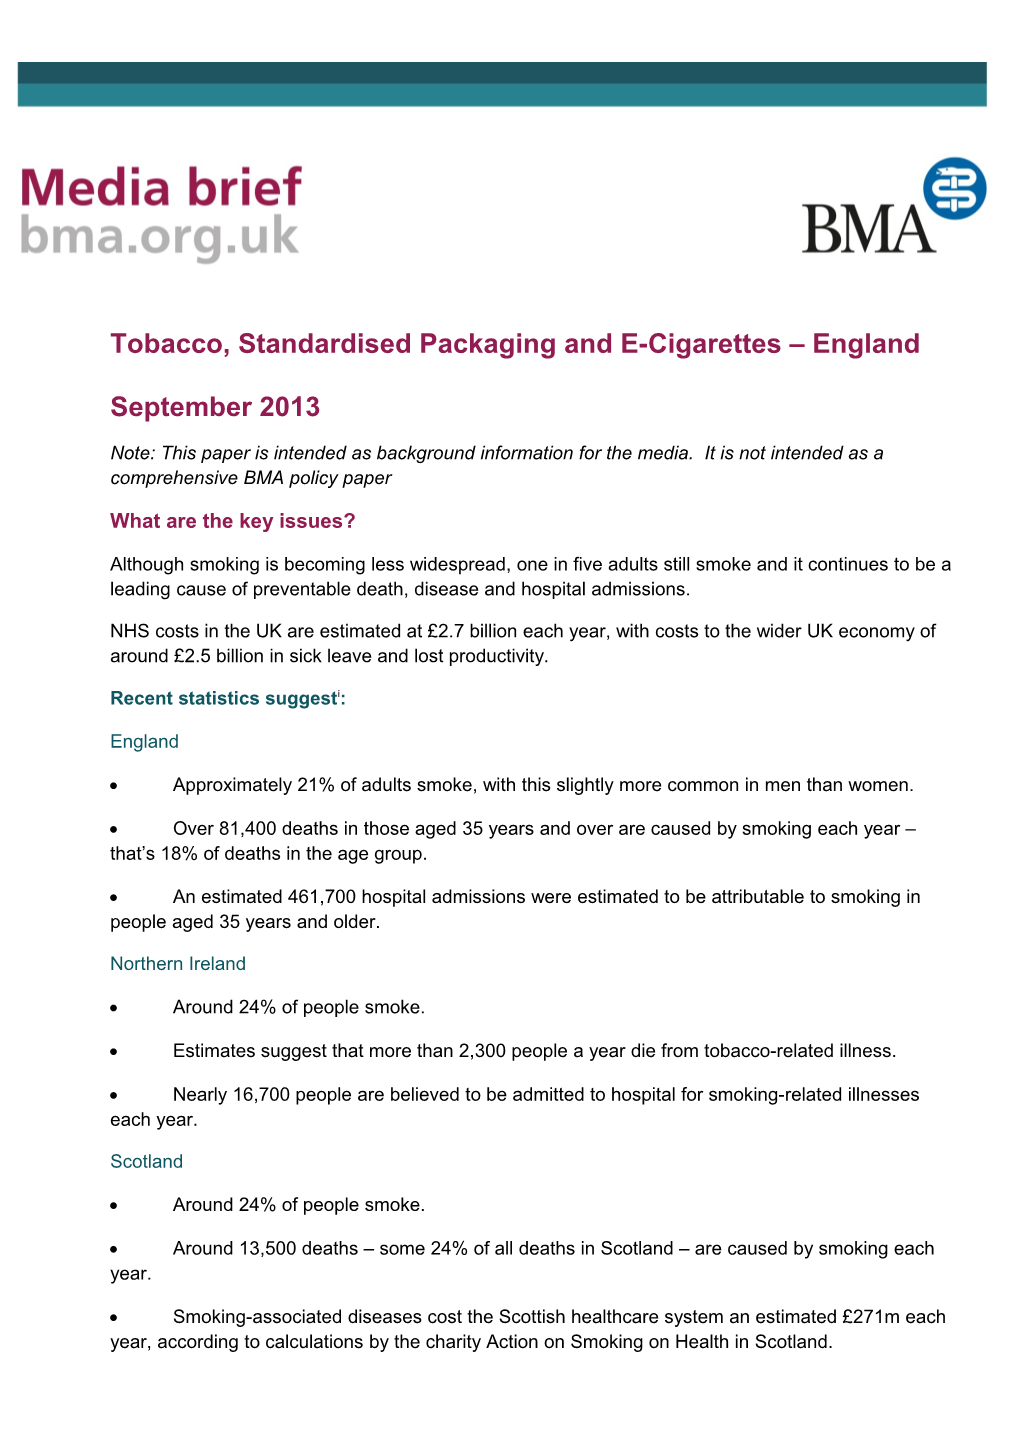 Tobacco, Standardised Packaging and E-Cigarettes England